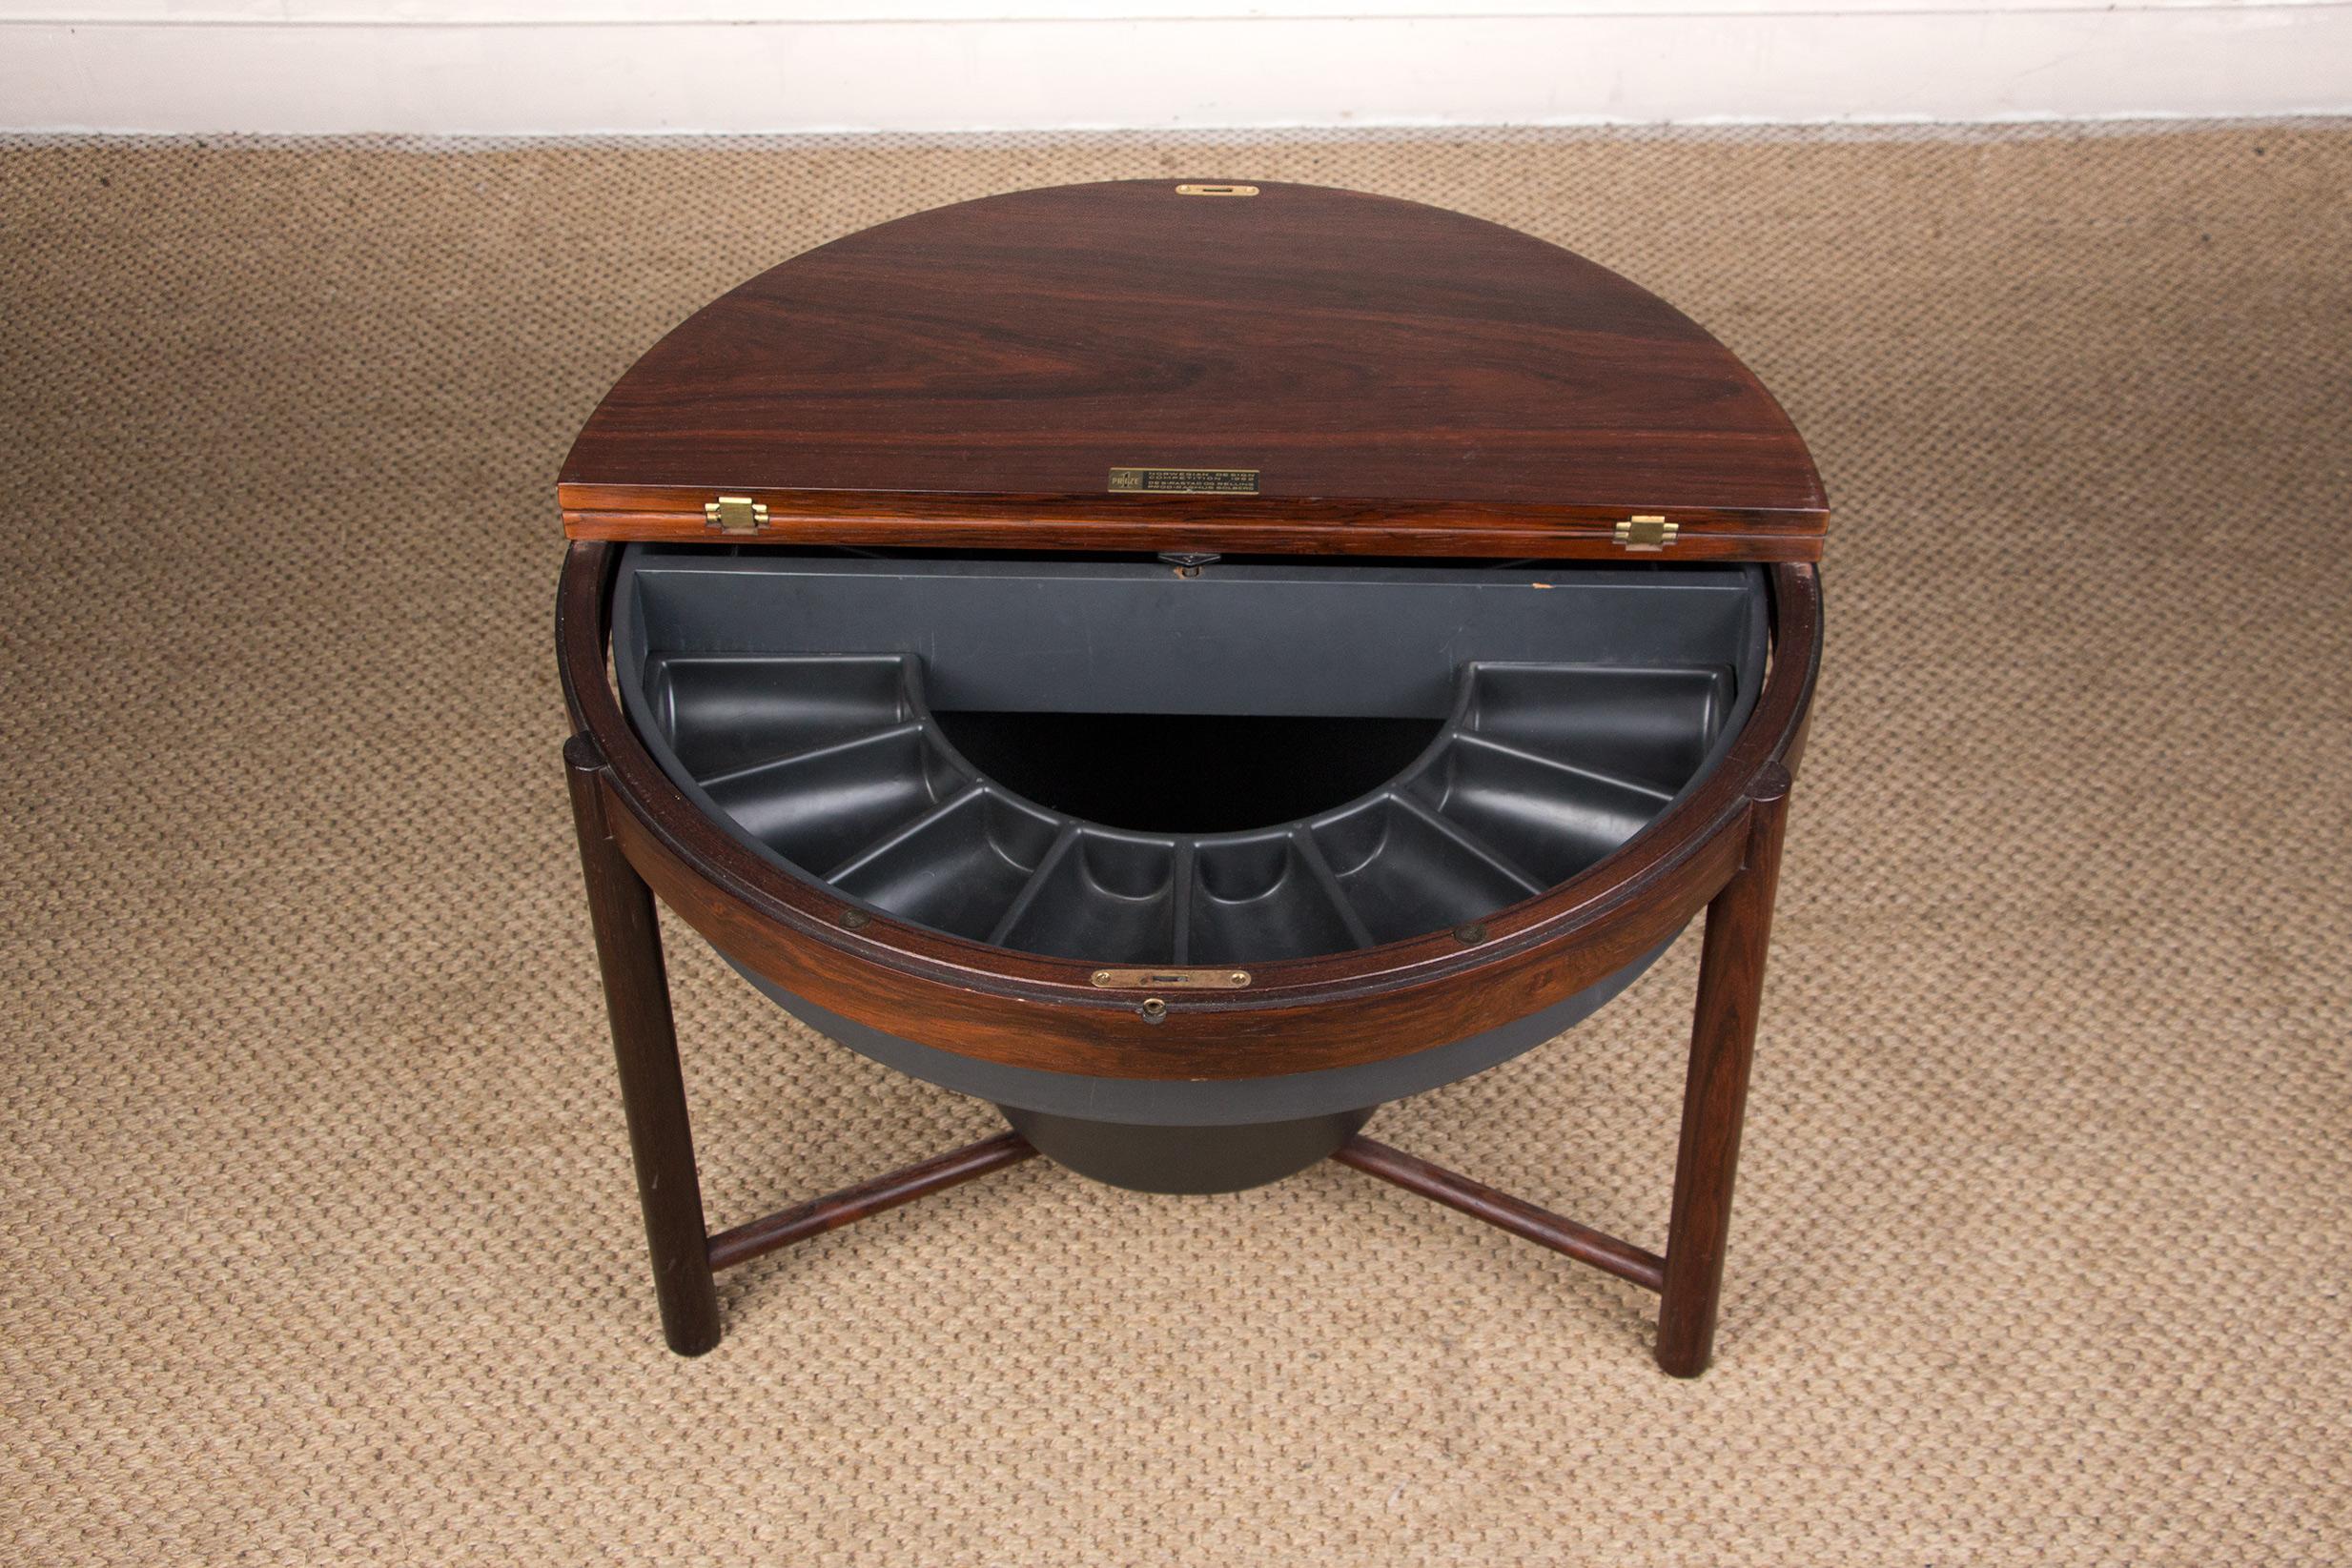 Superb Scandinavian bar cabinet that can be used as a coffee table. Consisting of a circular tray, half of which lifts up and opens onto a rotating box that can accommodate bottles and glasses. This particularly original and ingenious system, first